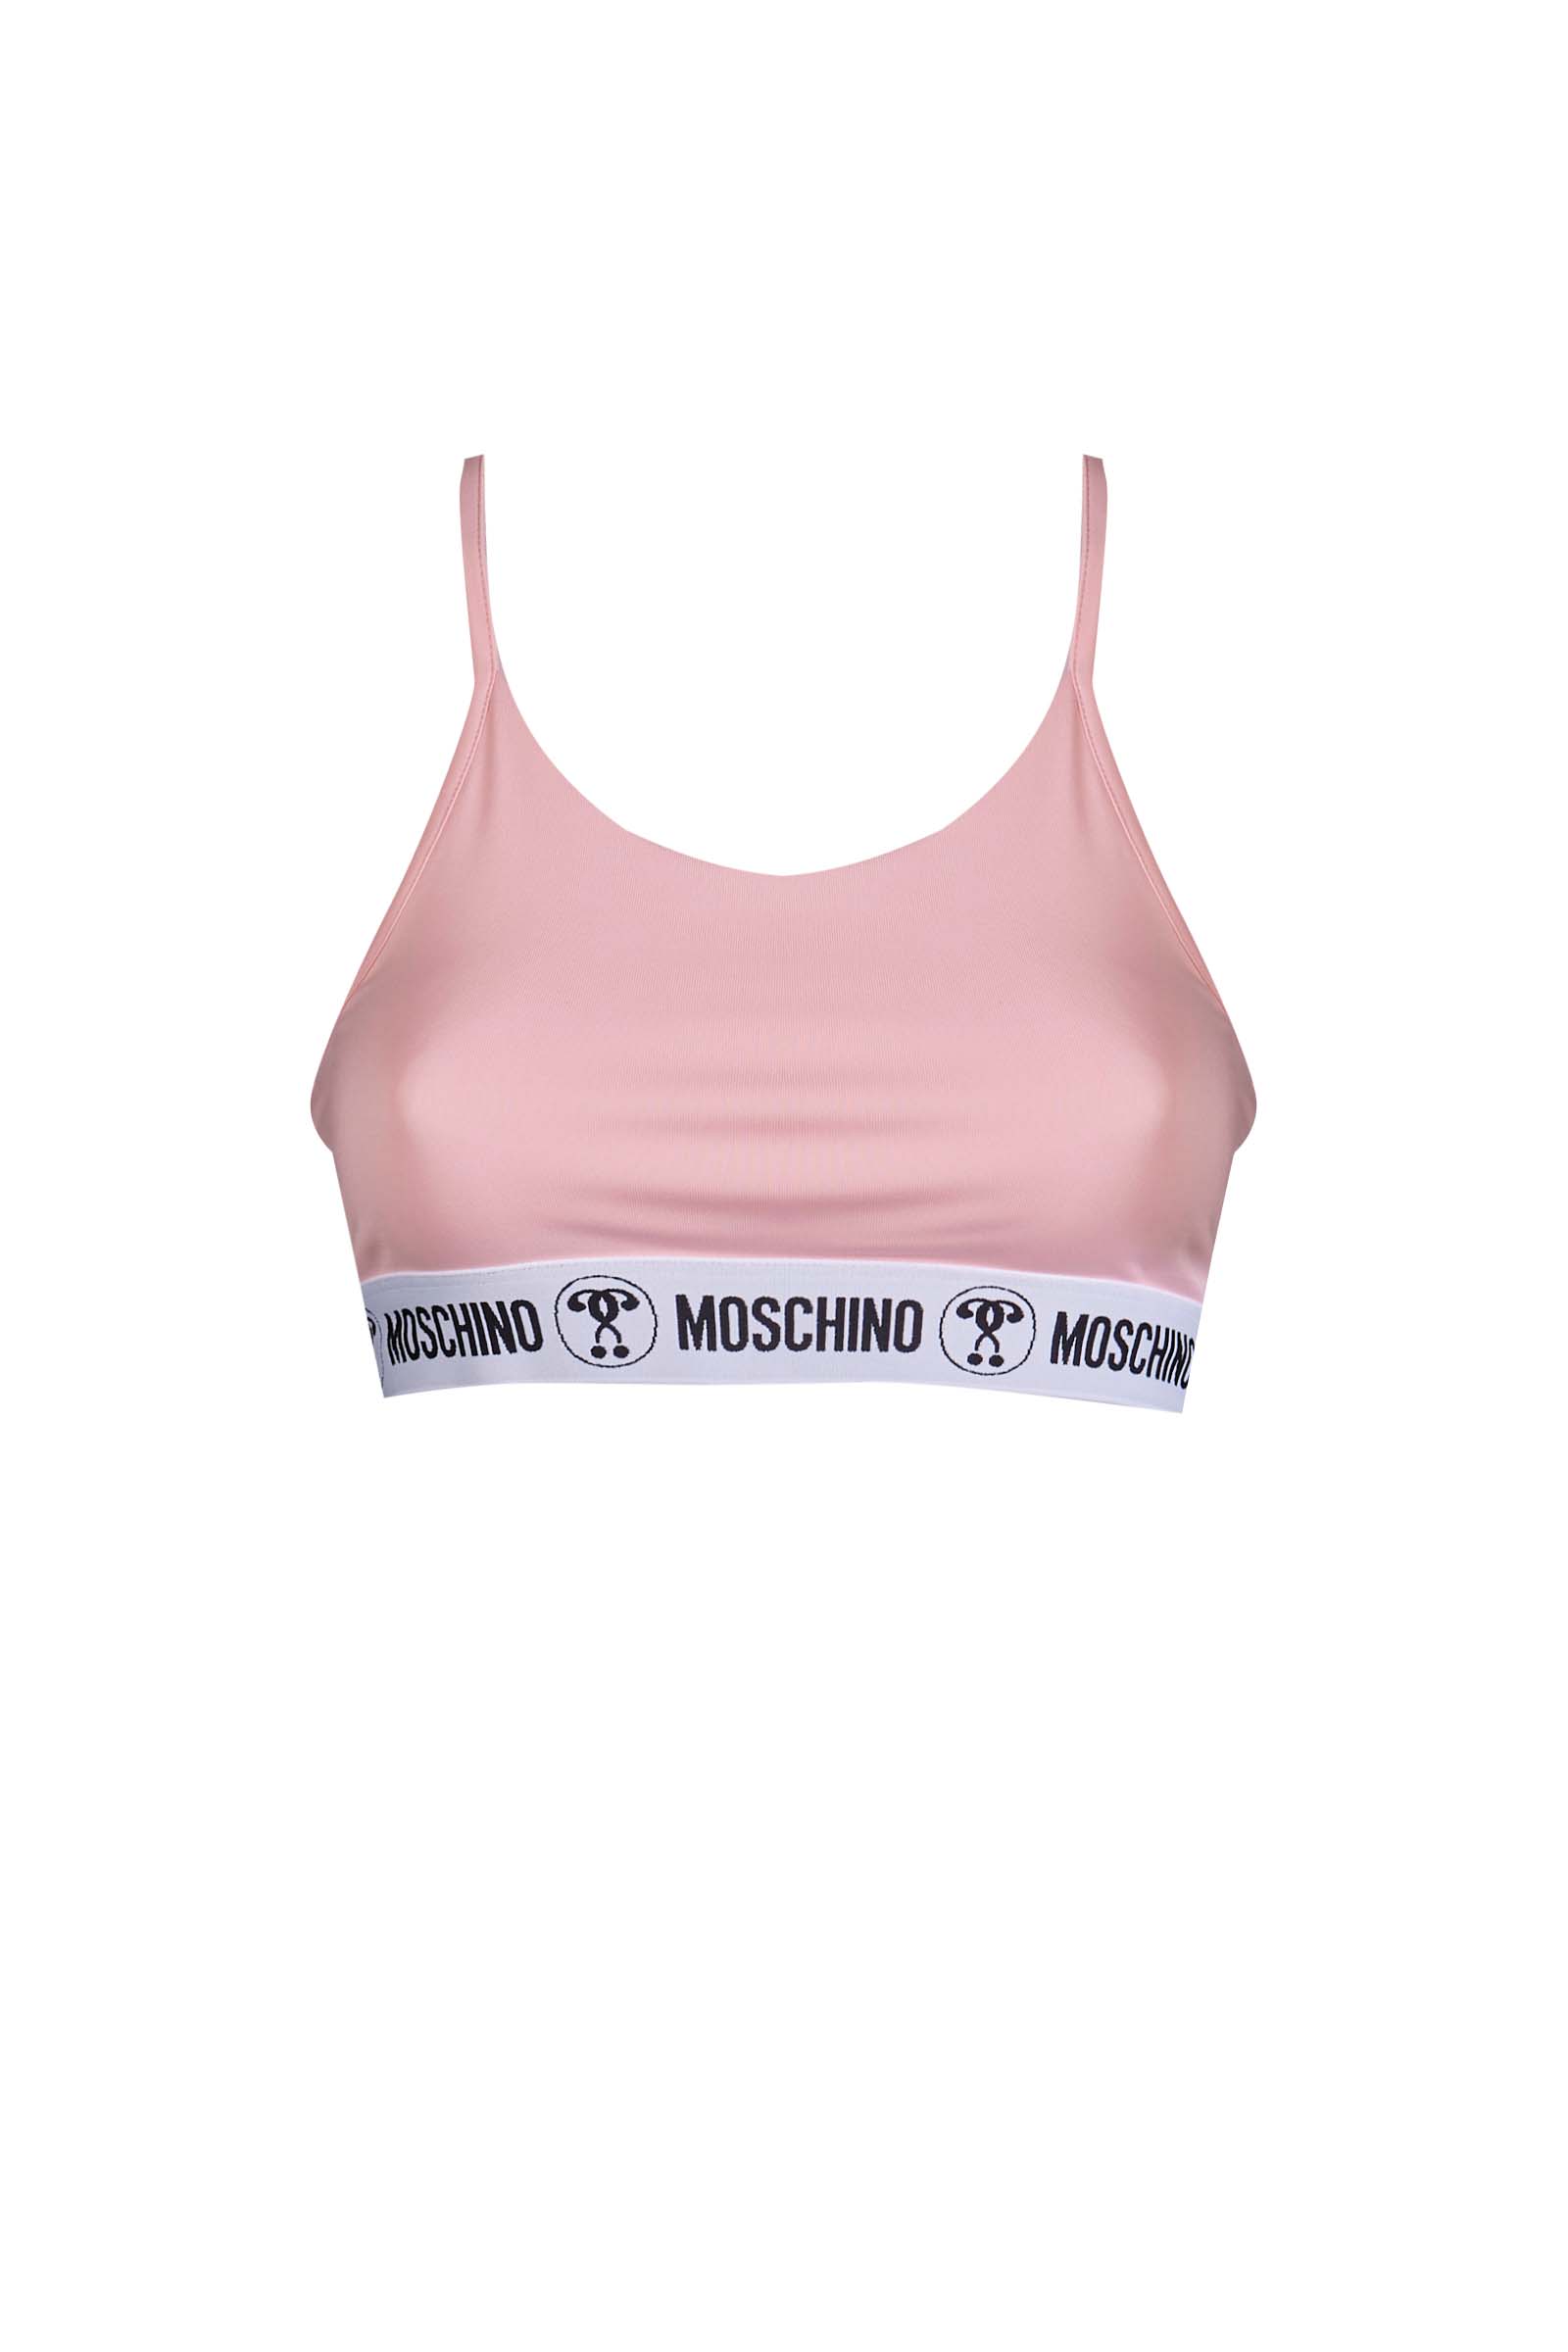 MOSCHINO TOP A0803 4602 227 DONNA